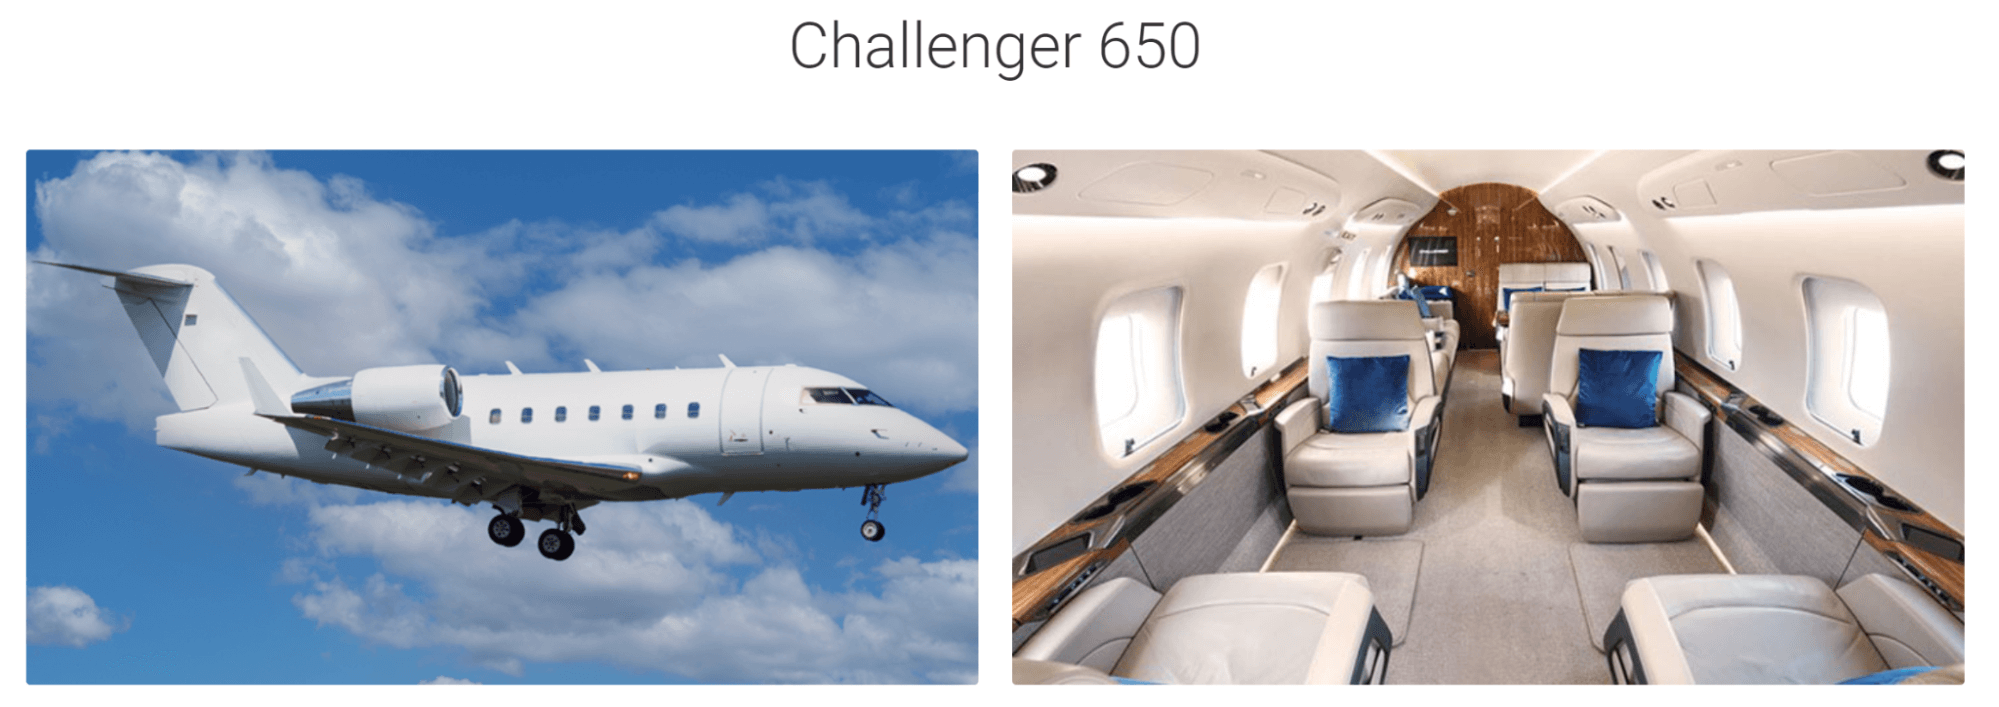 An exterior and interior picture of the business jet Challenger 650.